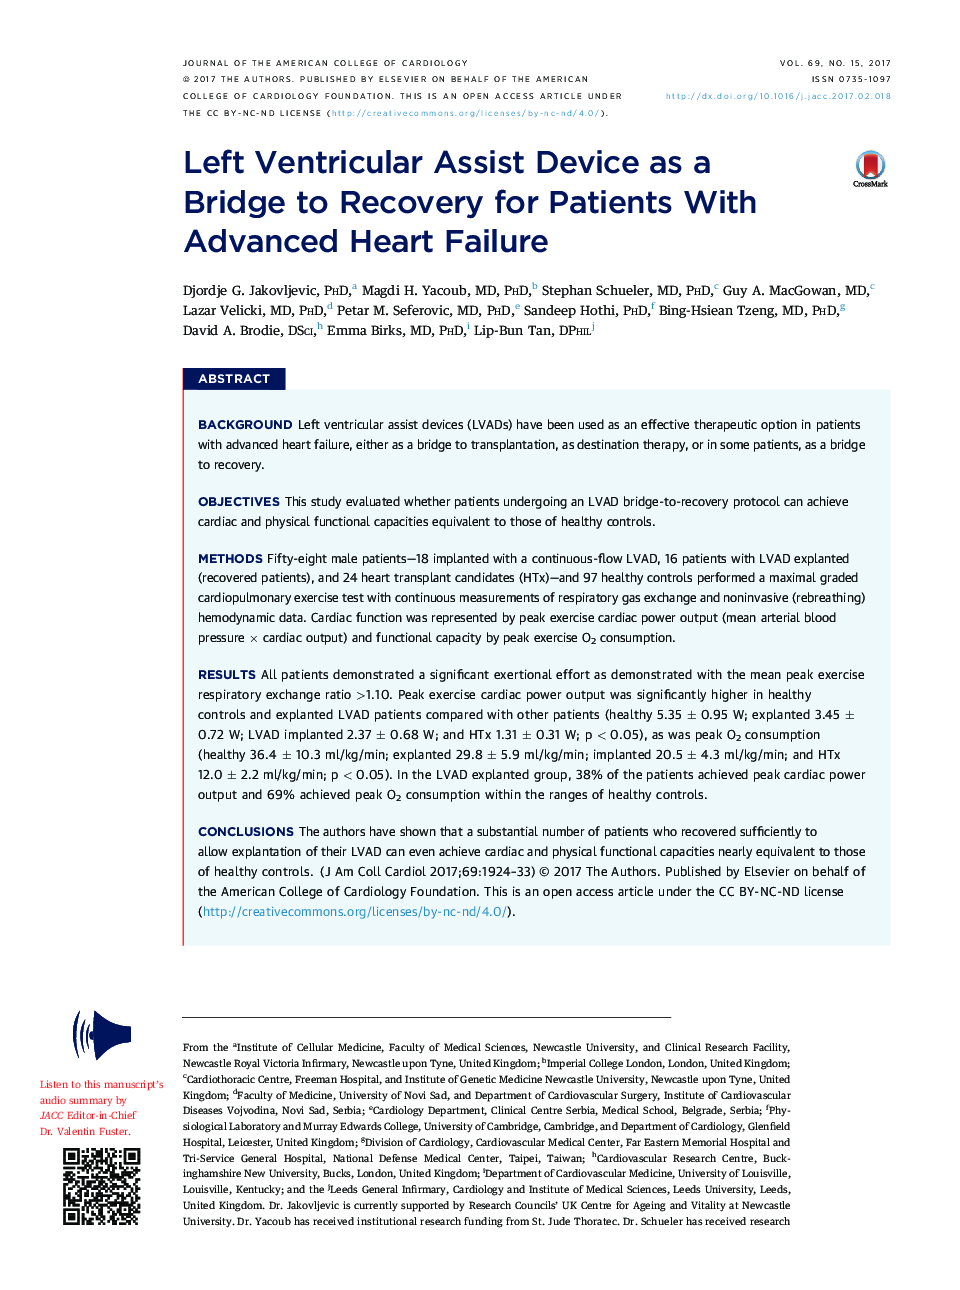 Left Ventricular Assist Device as a BridgeÂ to Recovery for Patients With Advanced Heart Failure